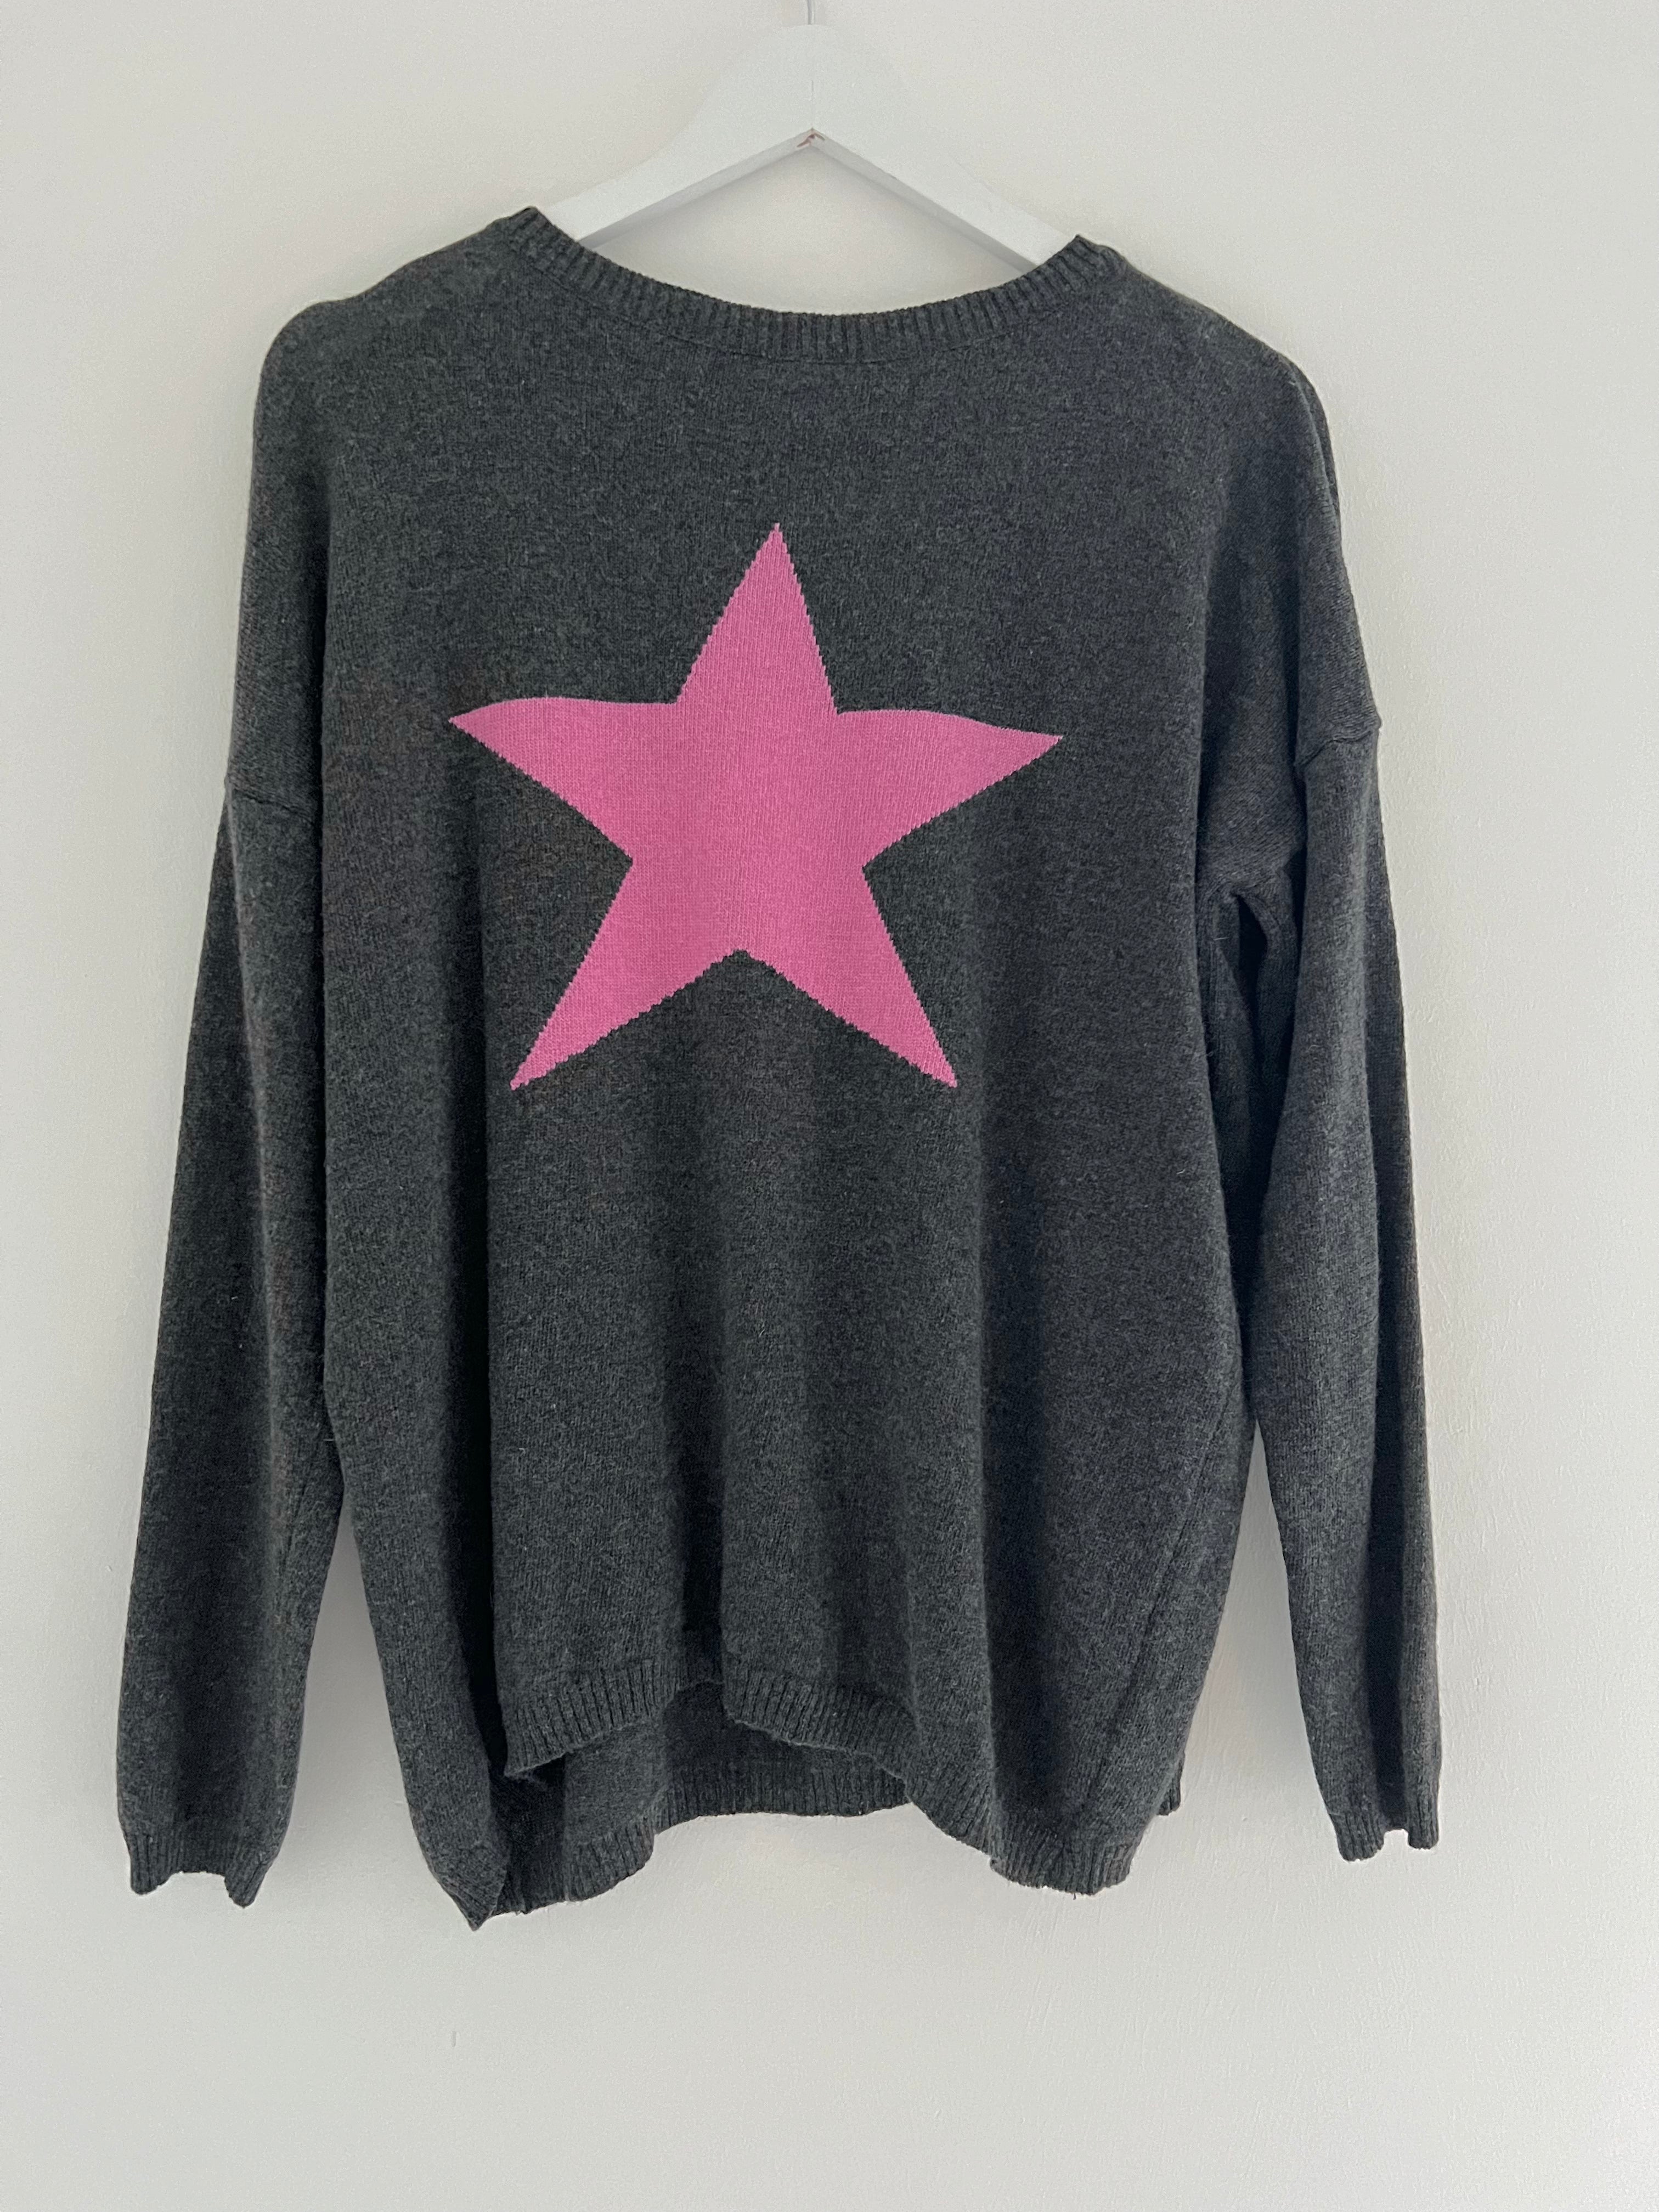 Star Cashmere Jumper in Charcoal & Pink